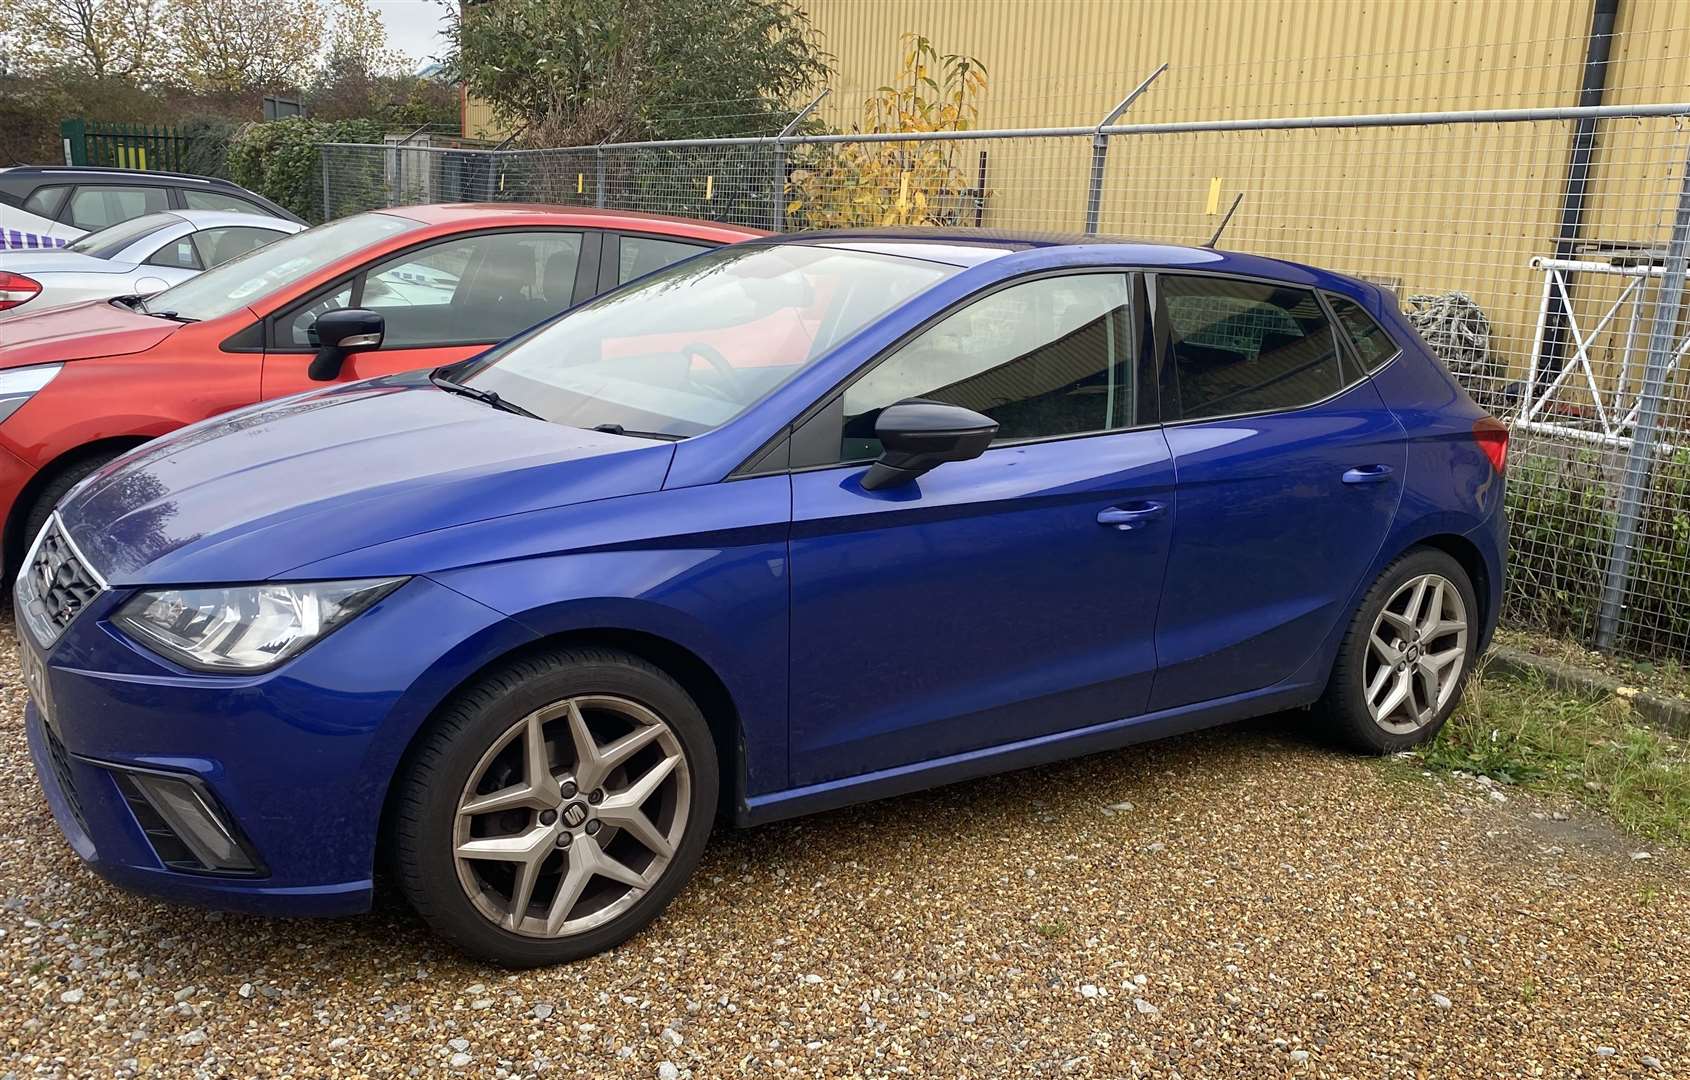 Even a modest 2017 Seat Ibiza costs thousands a year. Picture: KMG